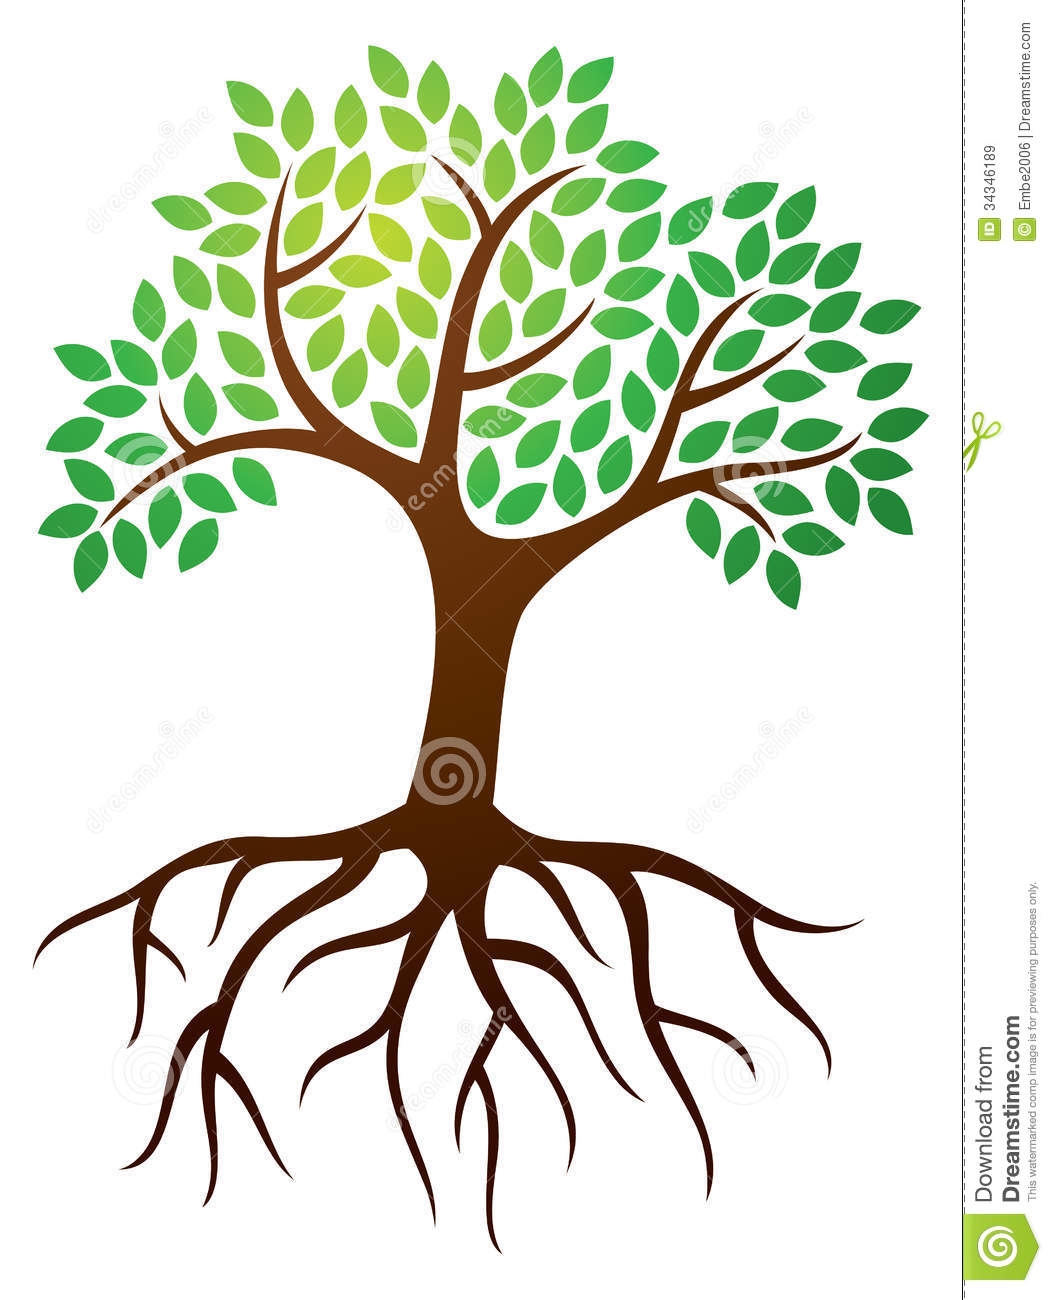 Tree Root clipart #5, Download drawings